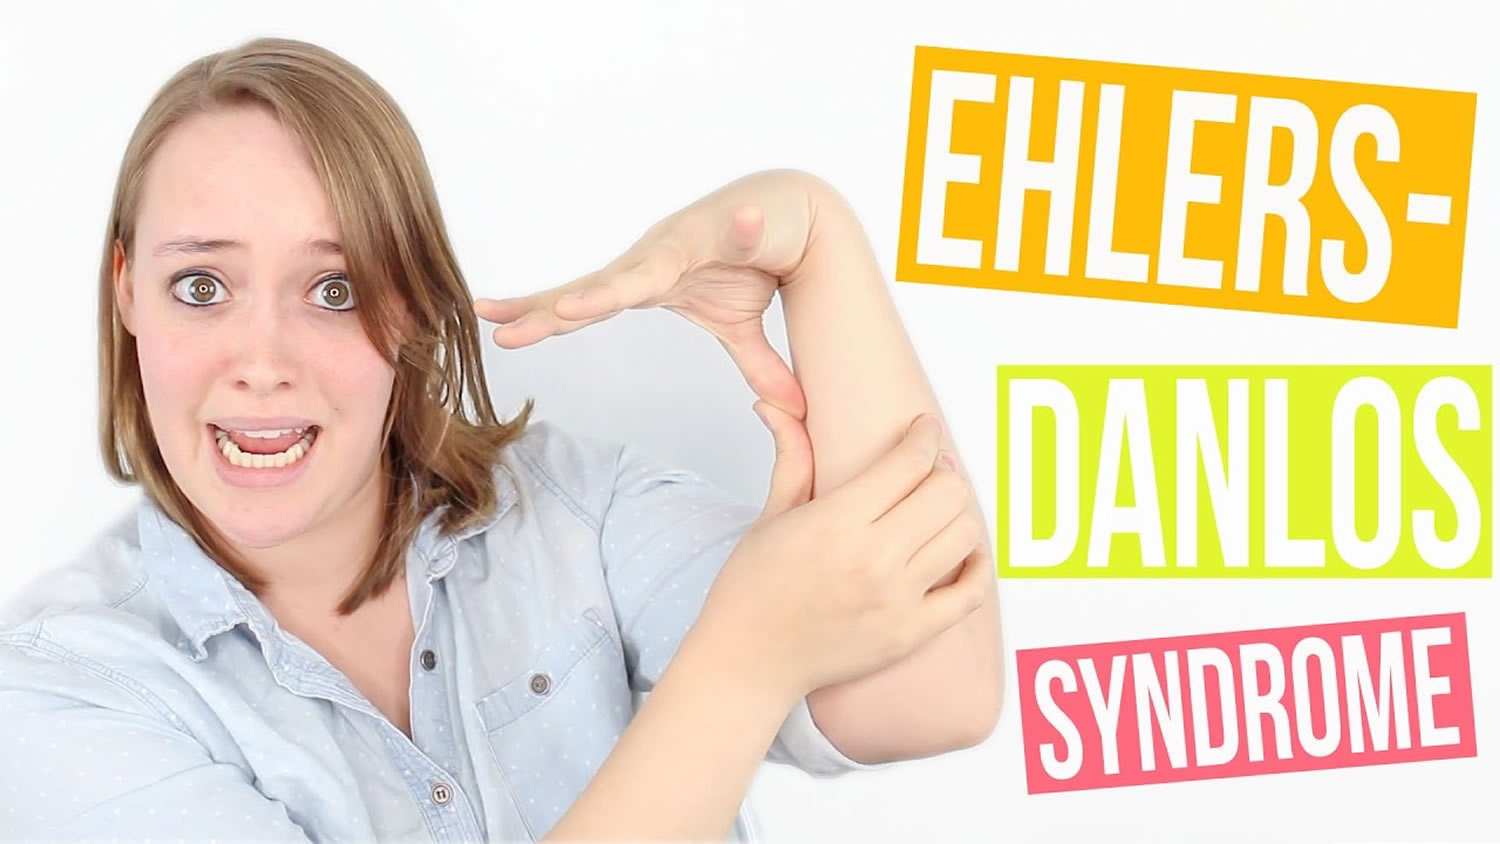 23 Signs You Grew Up With Ehlers Danlos Syndrome